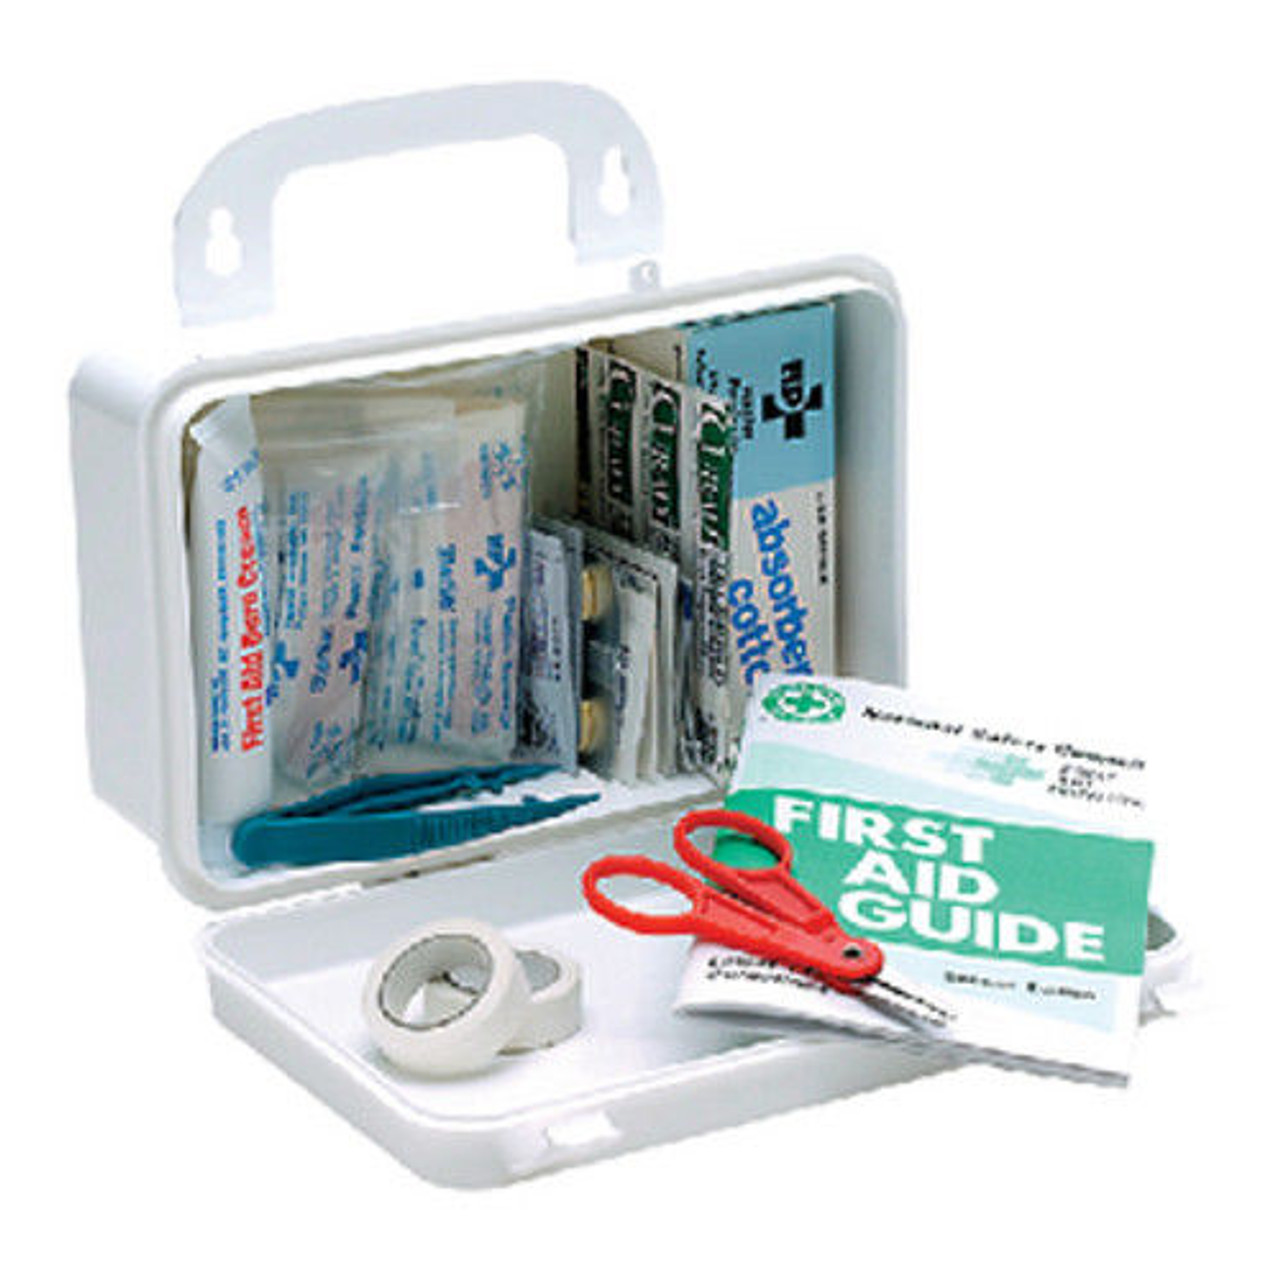 Deluxe First Aid Kit for Boats, RVs, Camping, Home and More